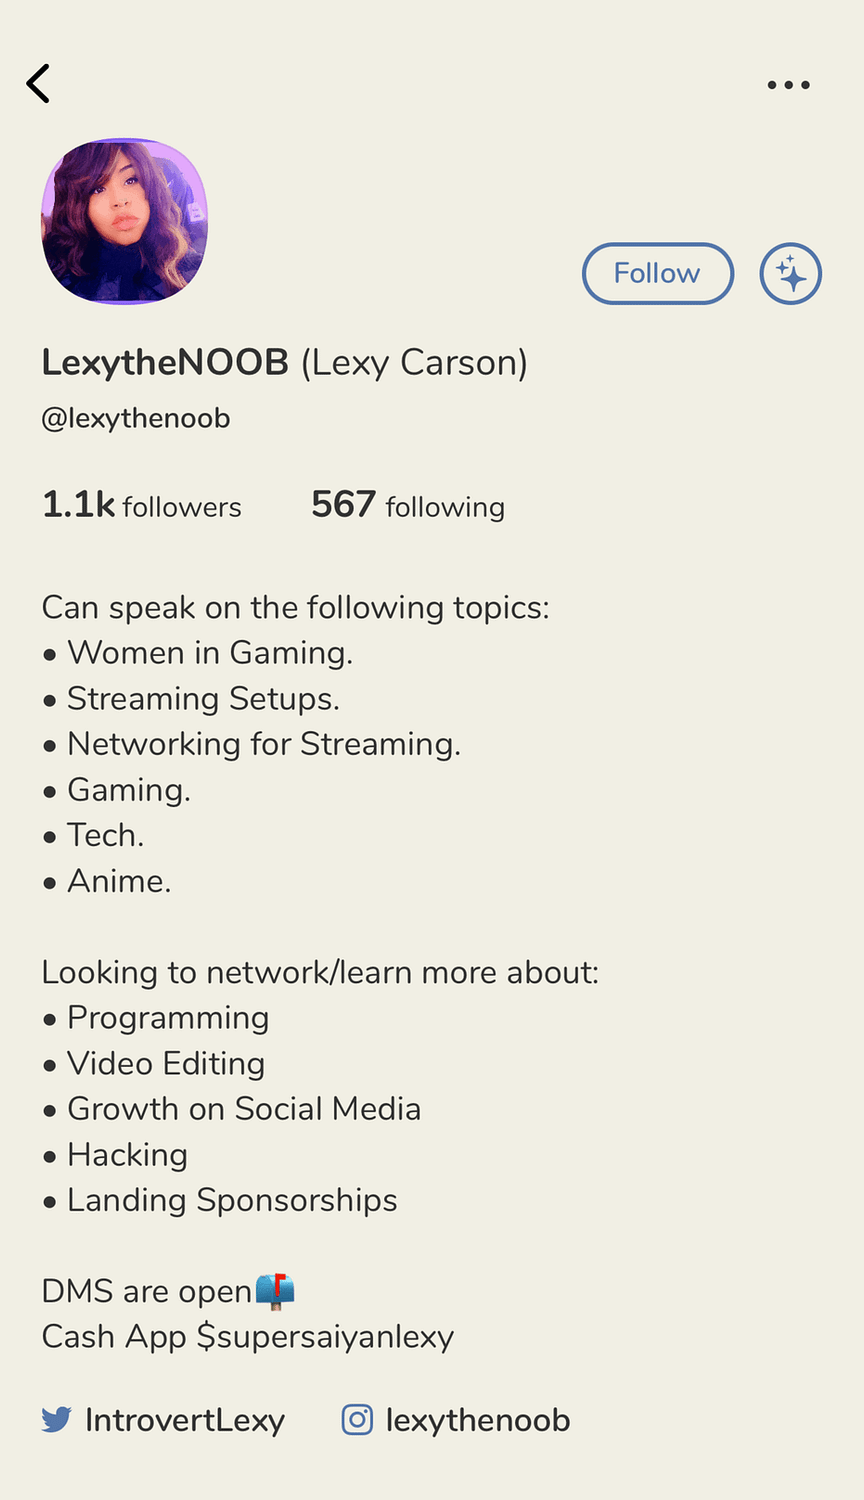 An image of thought leader Lexy Carson's Clubhouse profile.